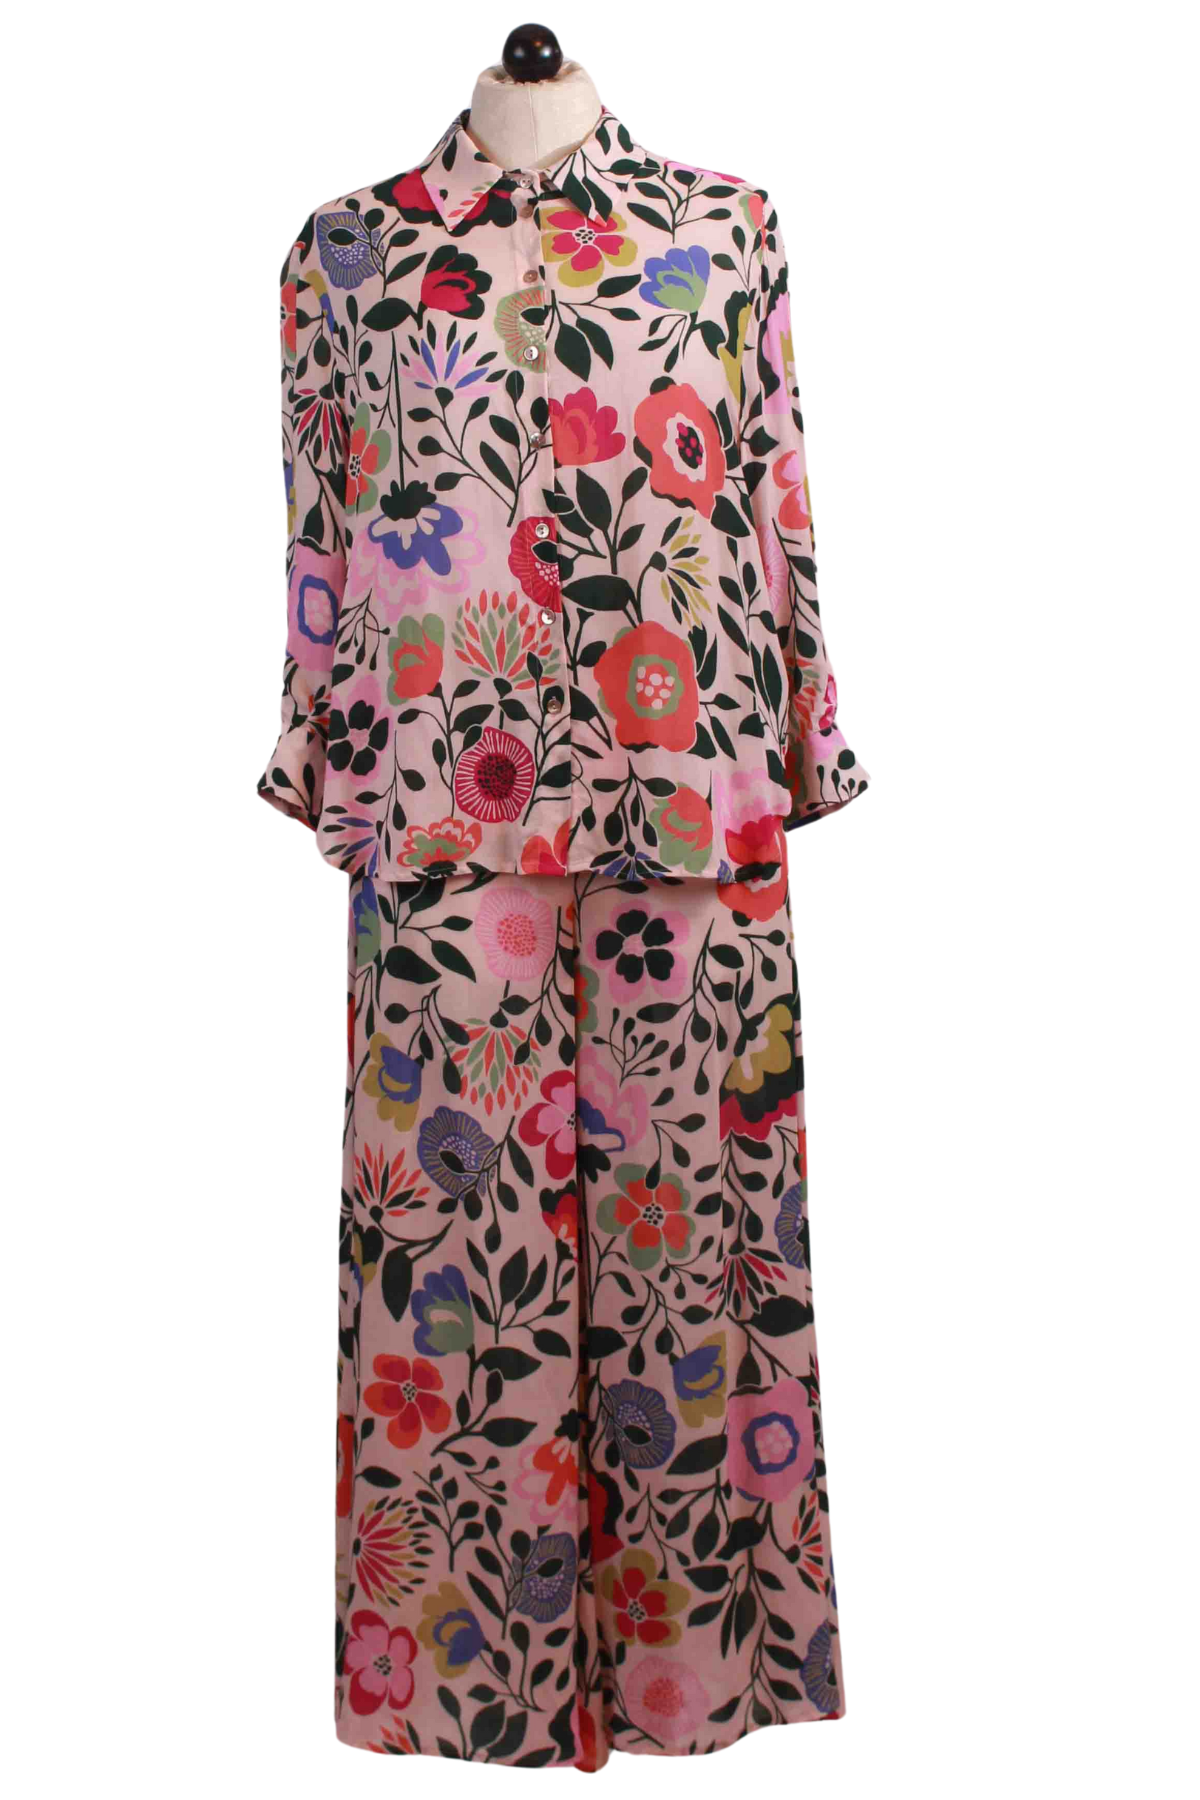 Powder Floral Print Viscose Shirt by Ivko with matching wide leg pant